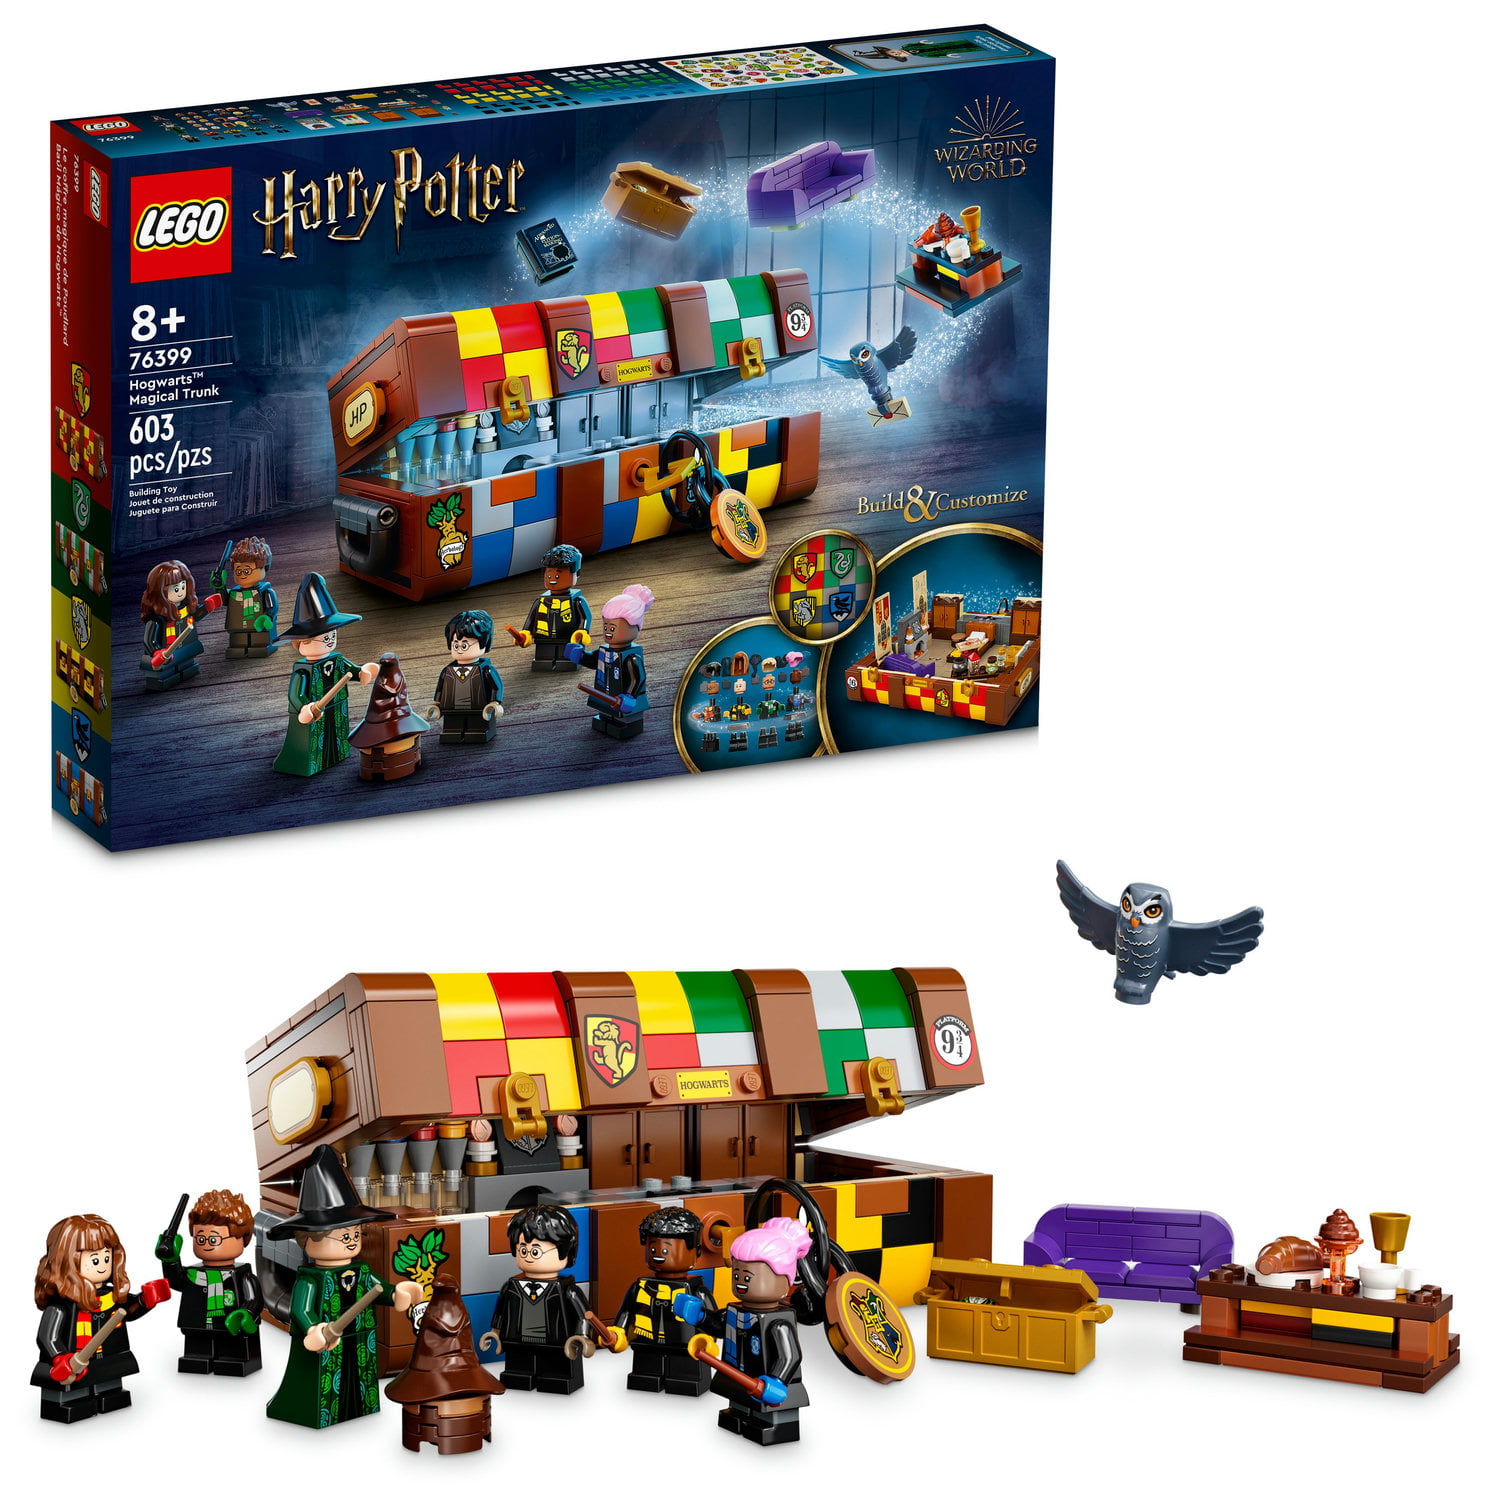 New 2020 LEGO Harry Potter Hogwarts Astronomy Tower 75969; Great Gift for Kids Who Love Castles Magical Action Minifigures and Harry Potter and The Half Blood Prince Toys 971 Pieces 